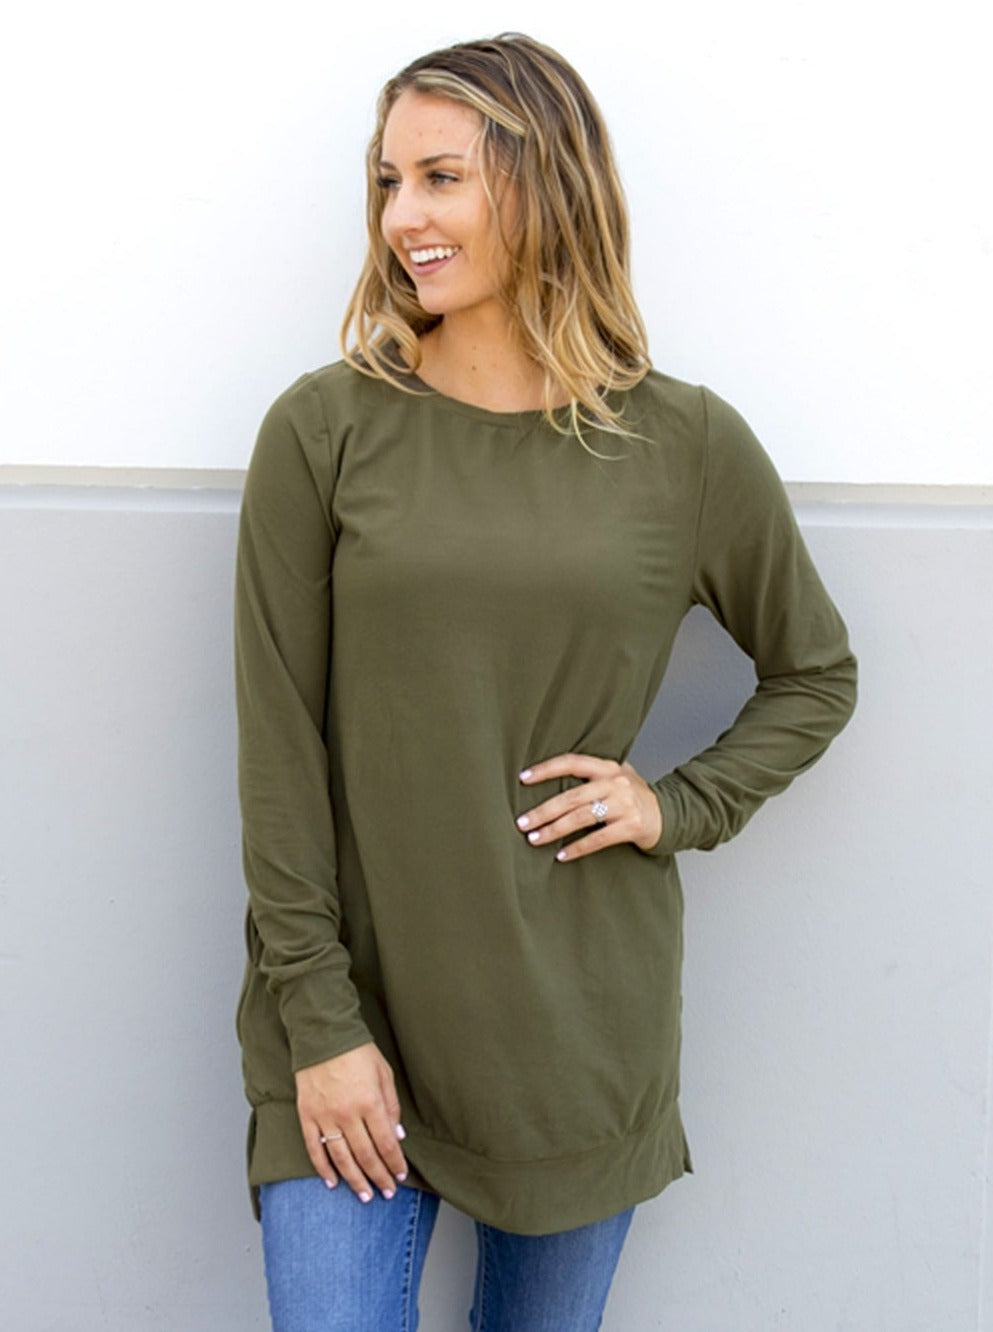 Soft & Cozy Sweater Tunic - Olive - Tickled Teal LLC